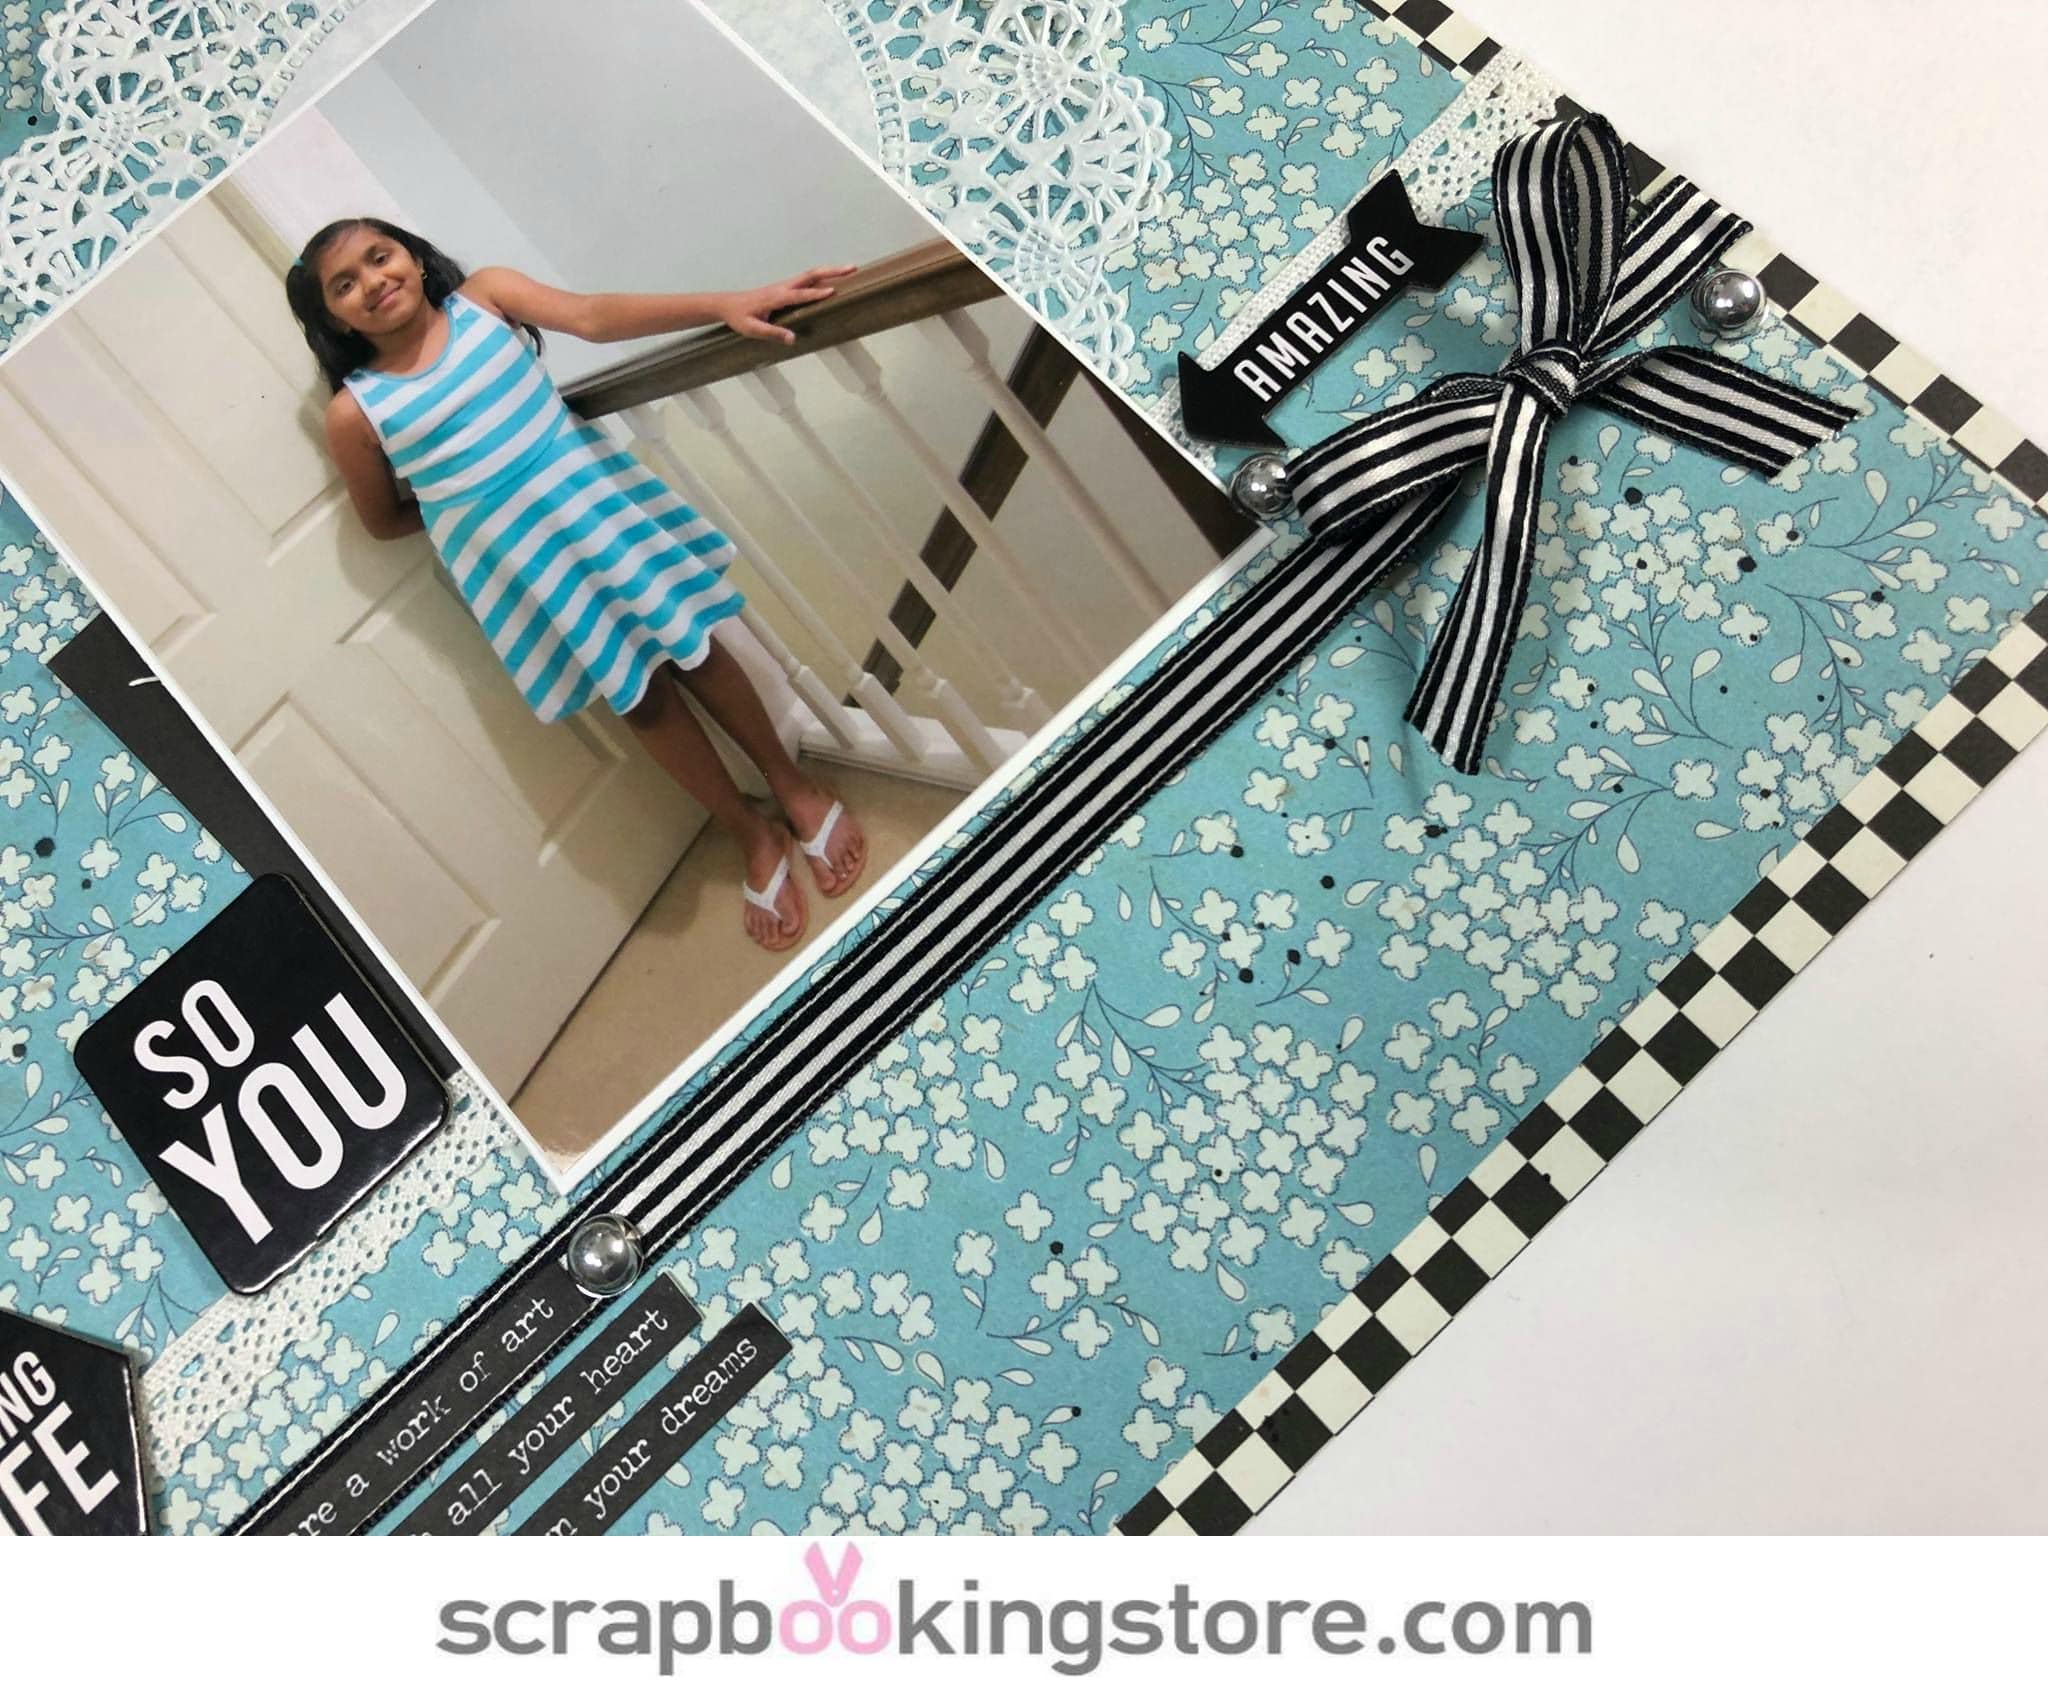 Monochromatic scrapbook layout by Becky using ScrapbookingStore April 2019 monthly kit with a girl photo